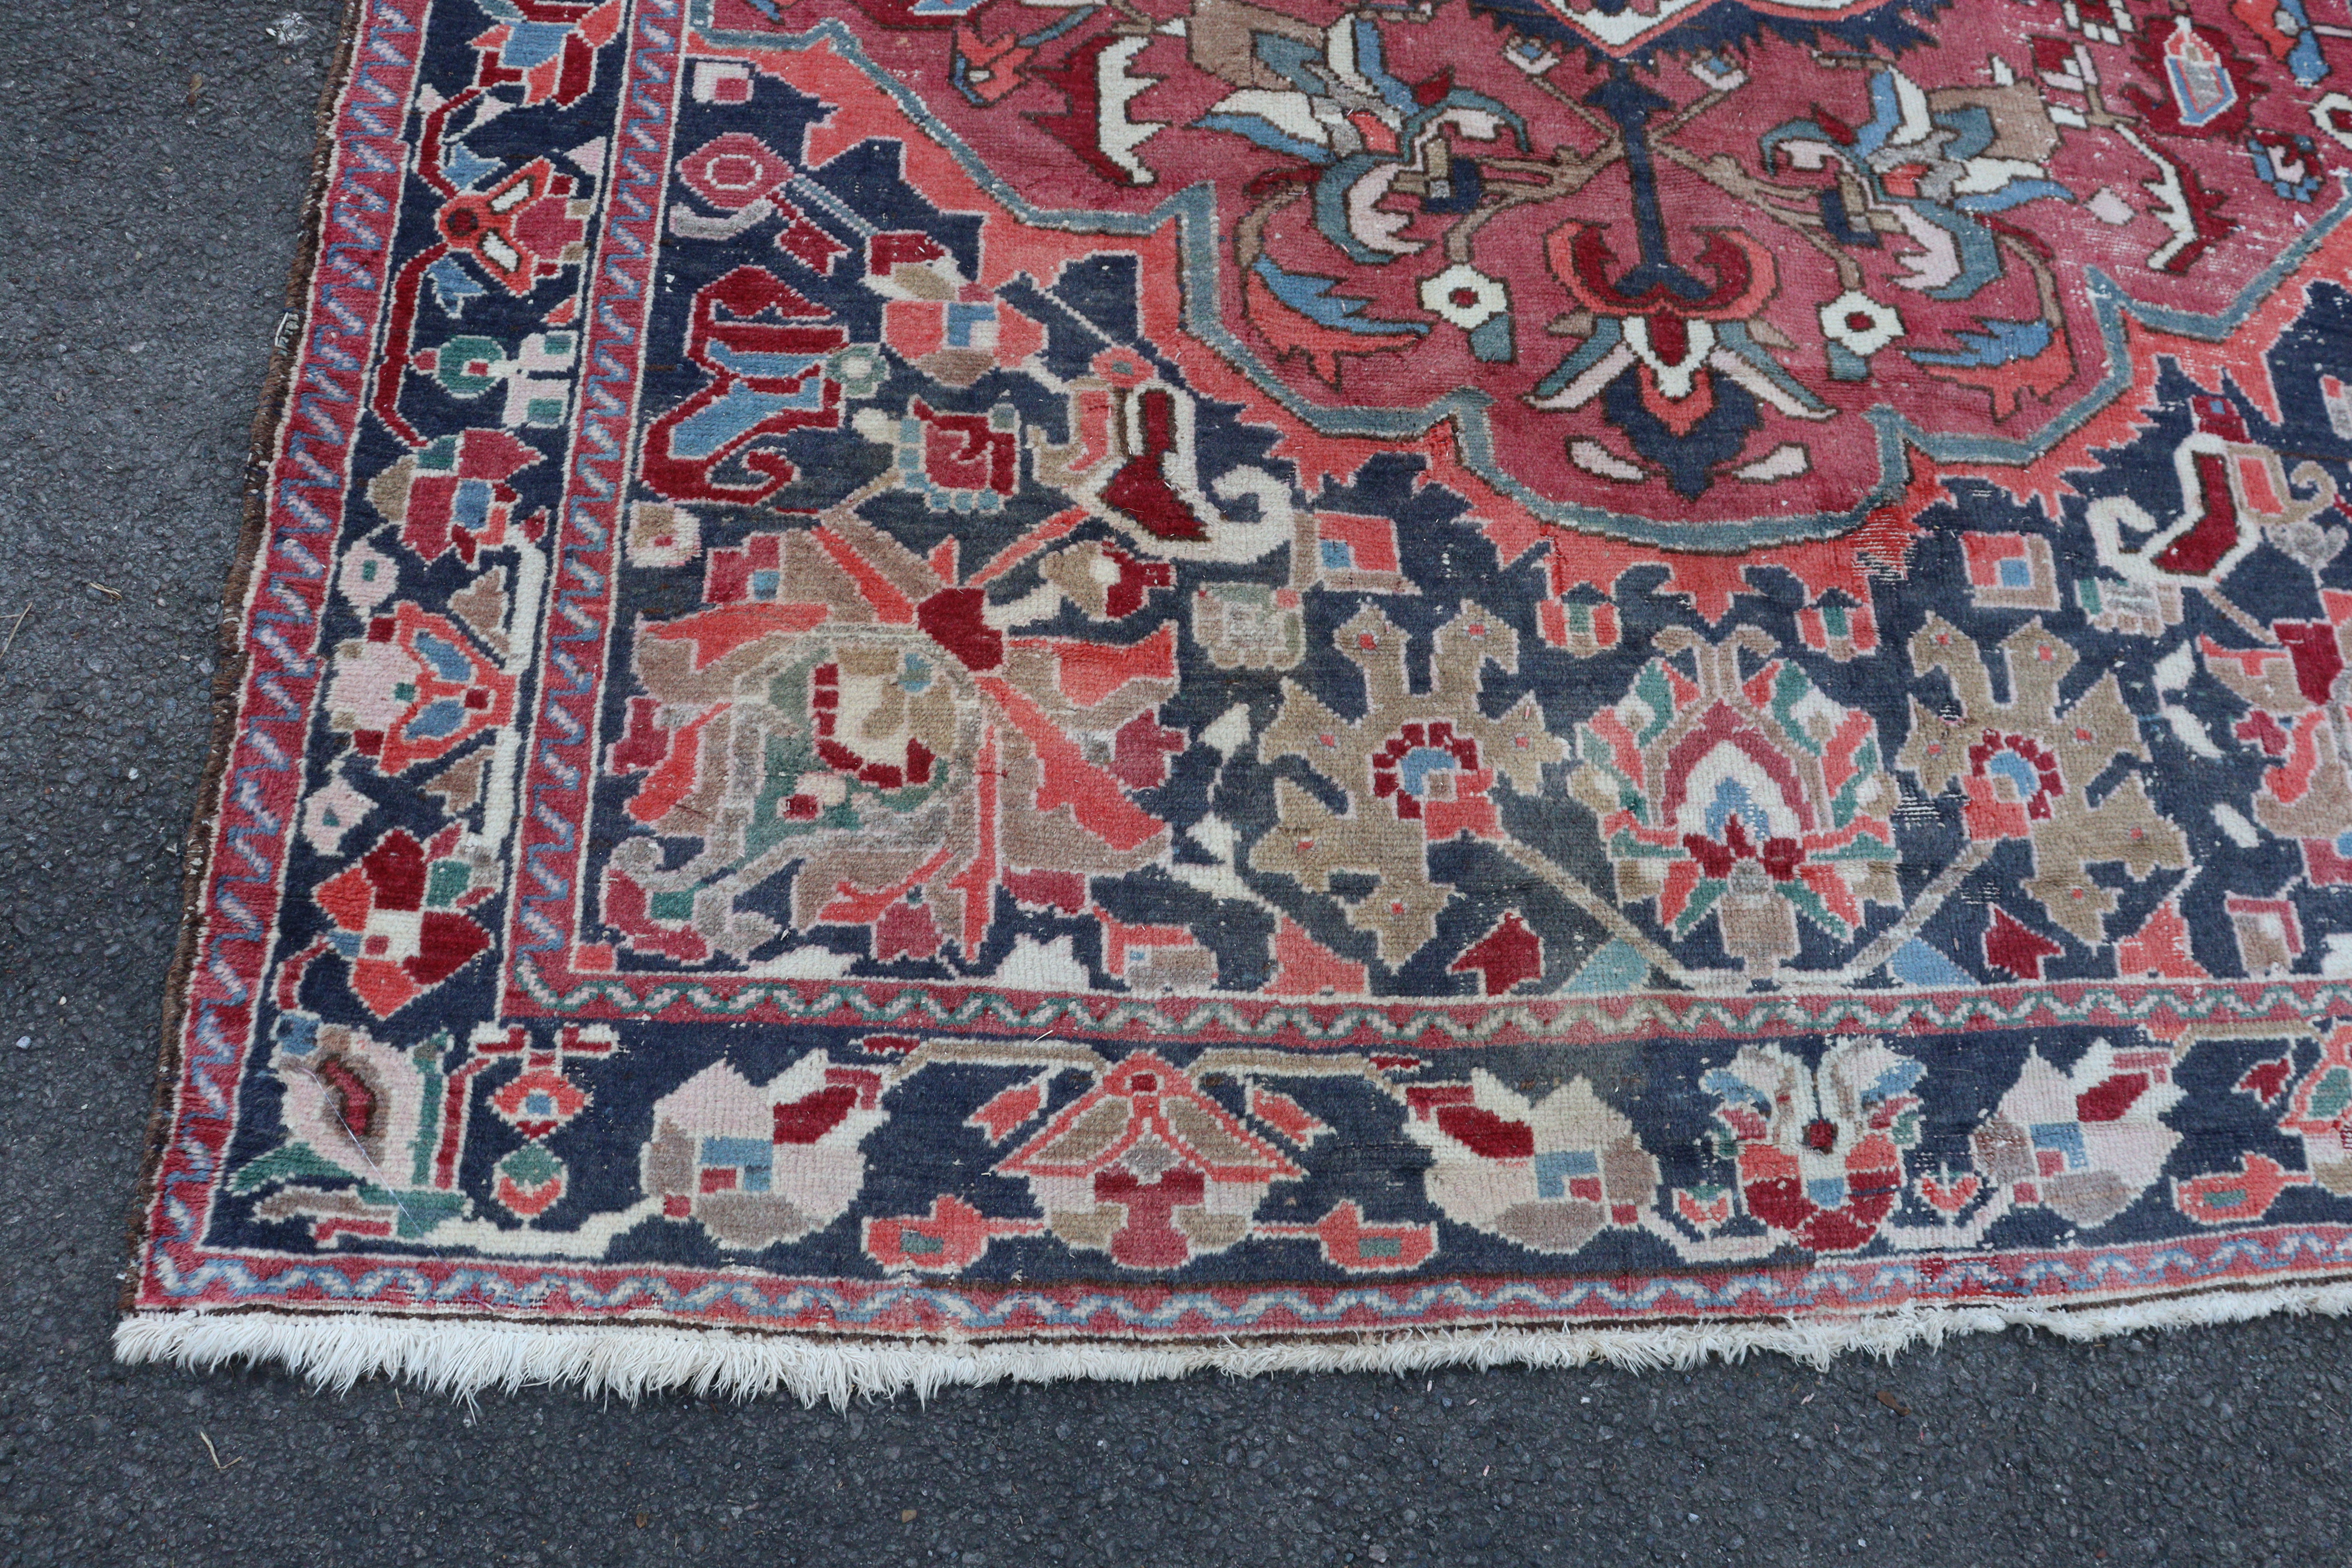 A Bakhtiar carpet of madder ground with central medallion & all-over repeating geometric designs in - Image 7 of 8